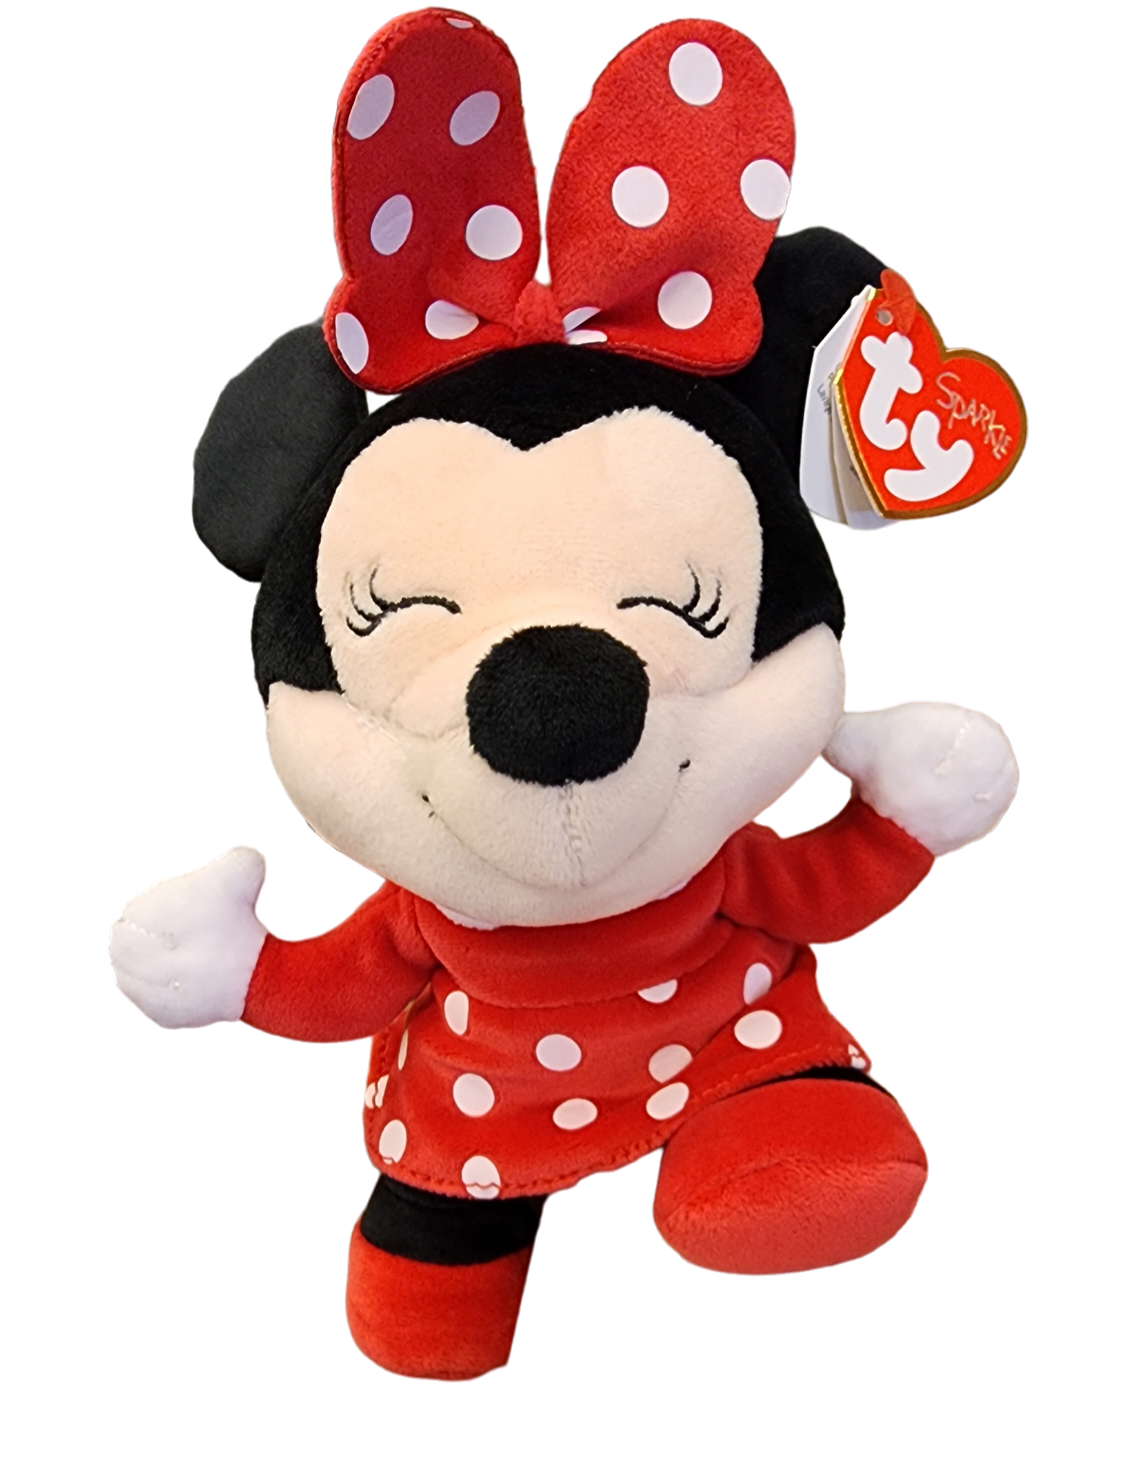 TY Minnie Mouse Plush Toy